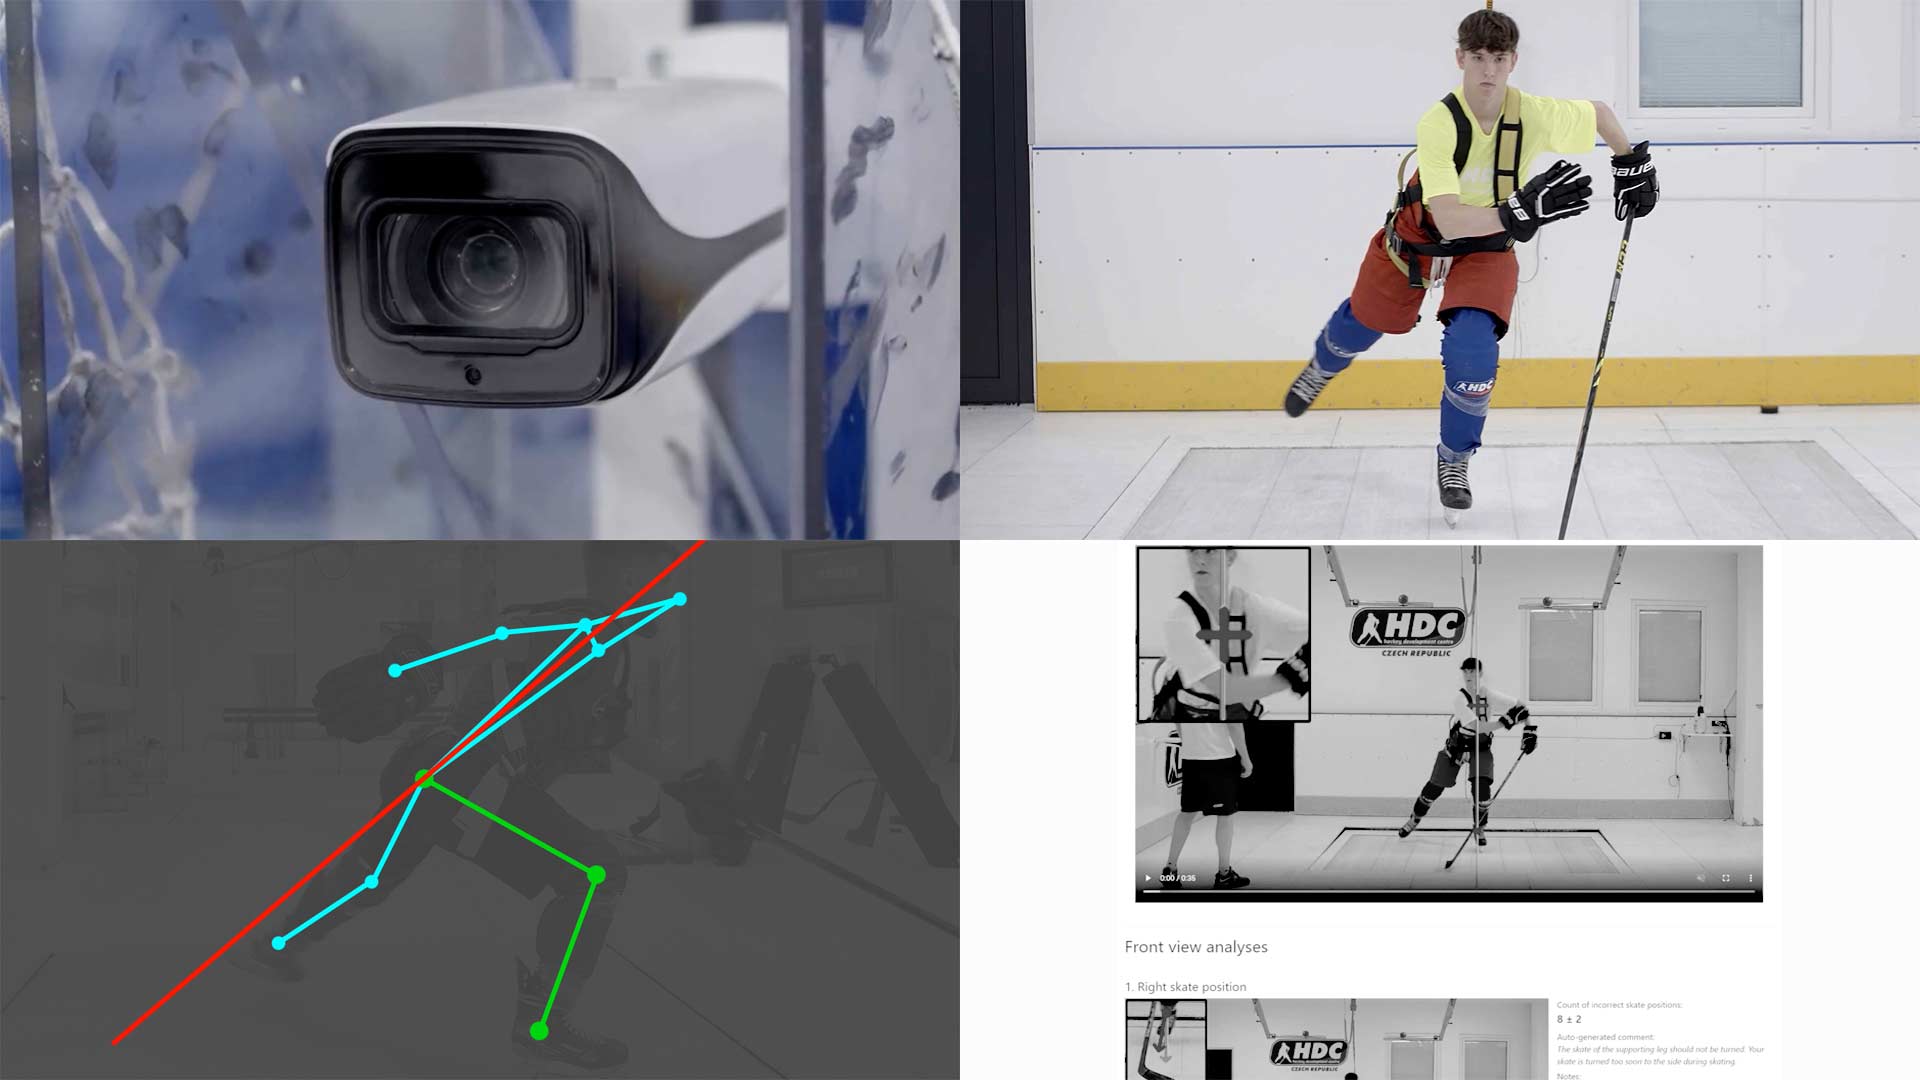 Skating Analysis system powered by artificial intelligence